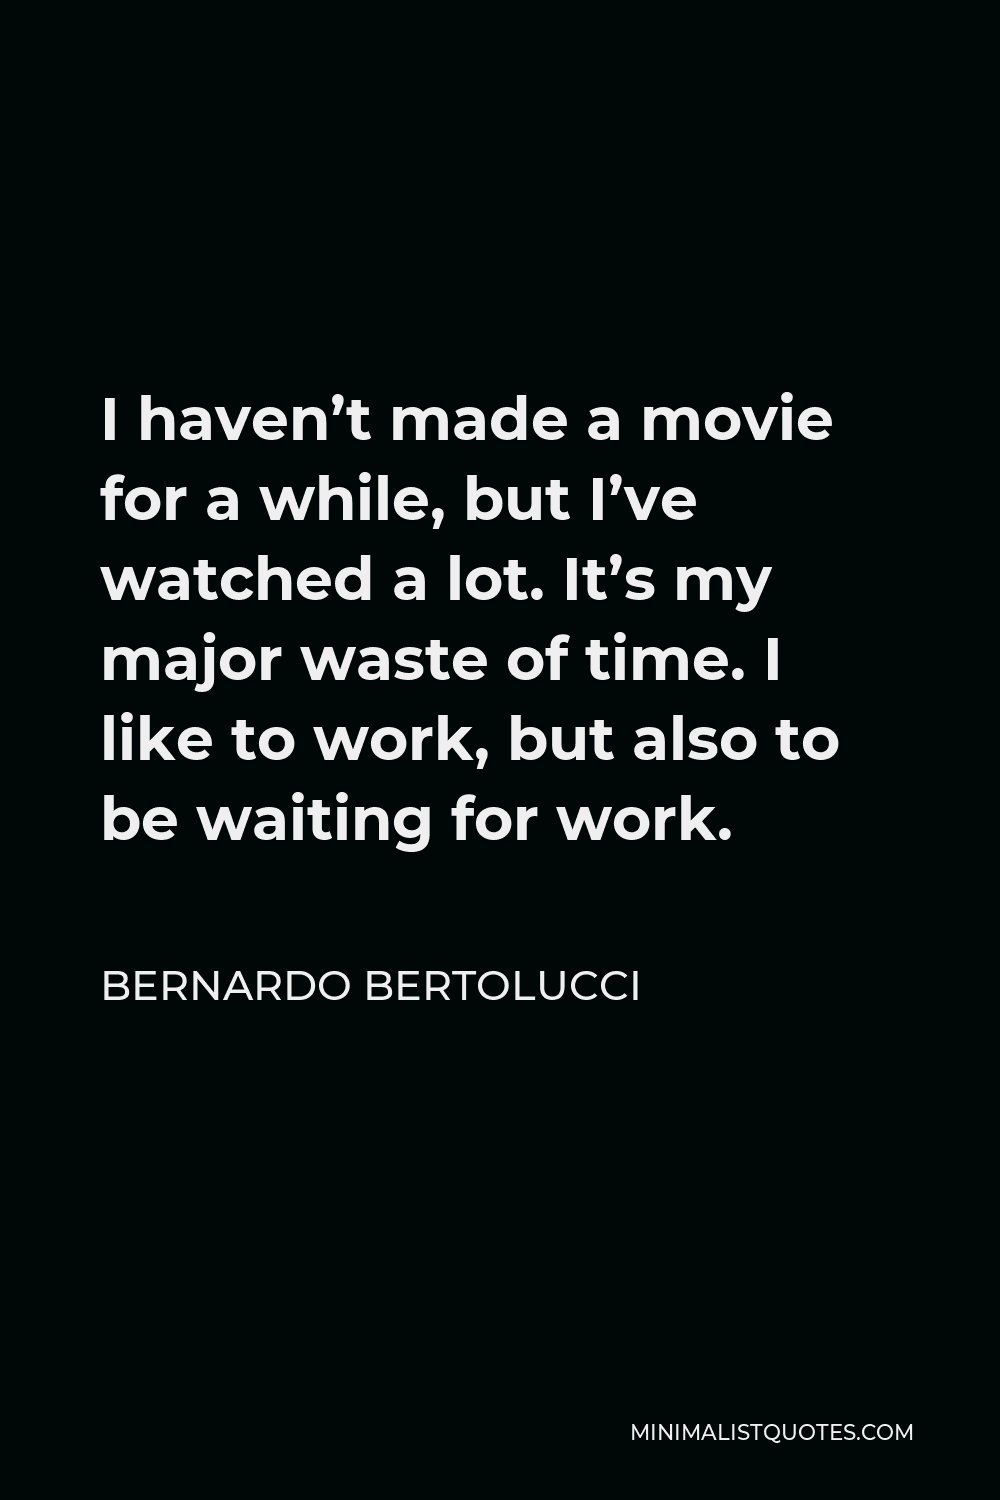 Bernardo Bertolucci Quote - I haven’t made a movie for a while, but I’ve watched a lot. It’s my major waste of time. I like to work, but also to be waiting for work.